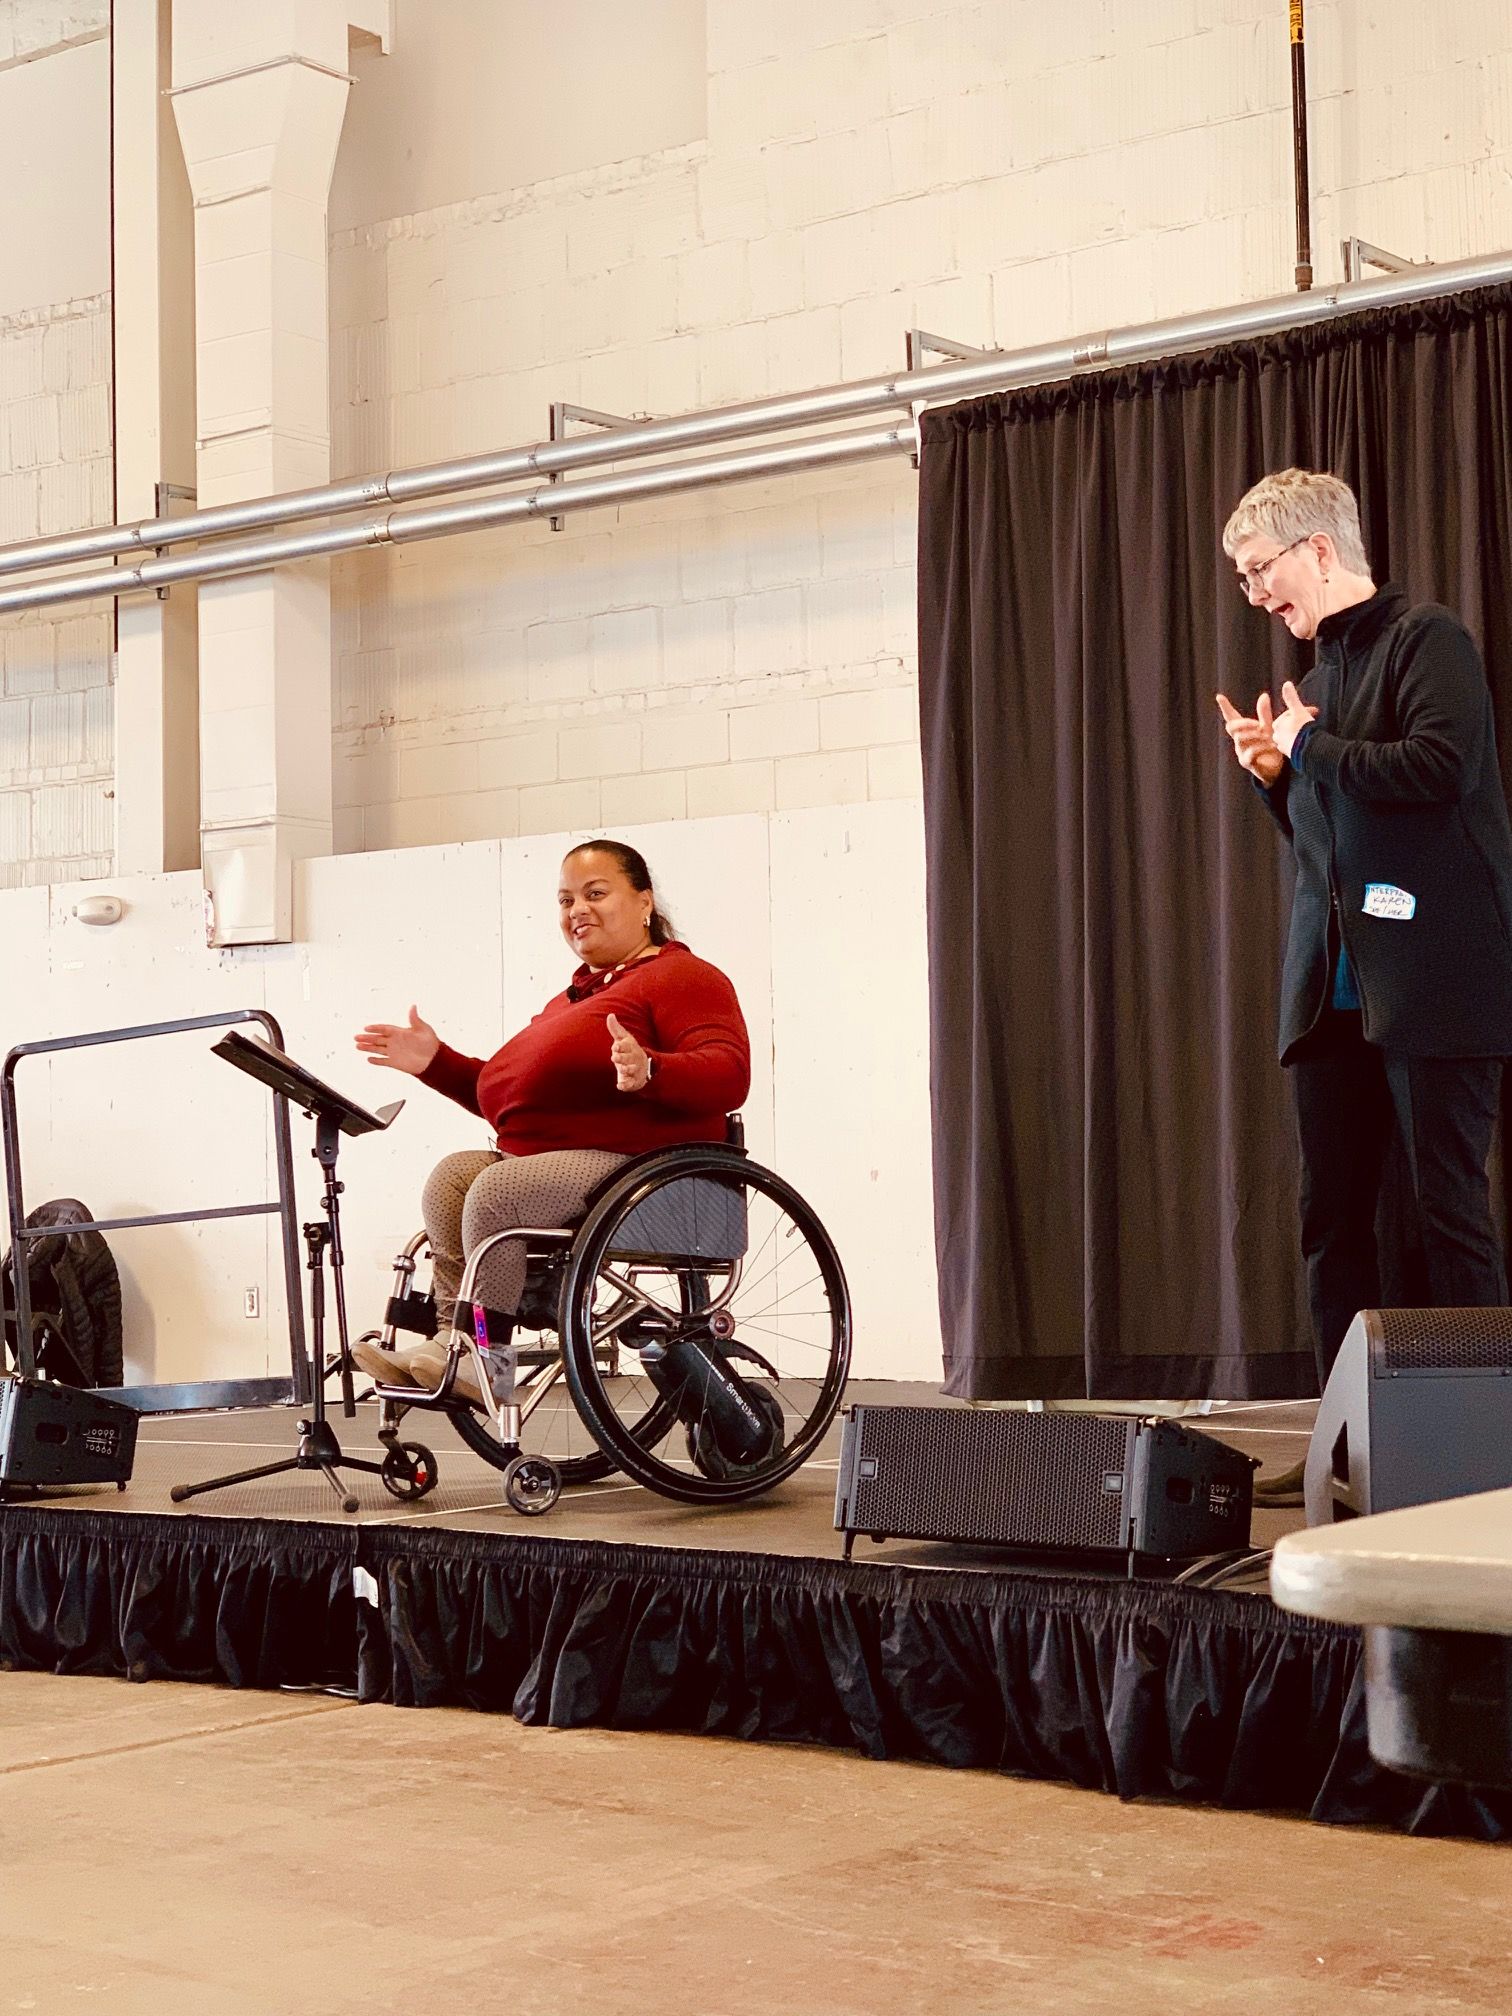 Anjali Forber-Pratt, PhD and the sign language interpreter on a stage. Dr. Forber-Pratt is wearing a red shirt and using her hands to talk about community and the Rehab Act